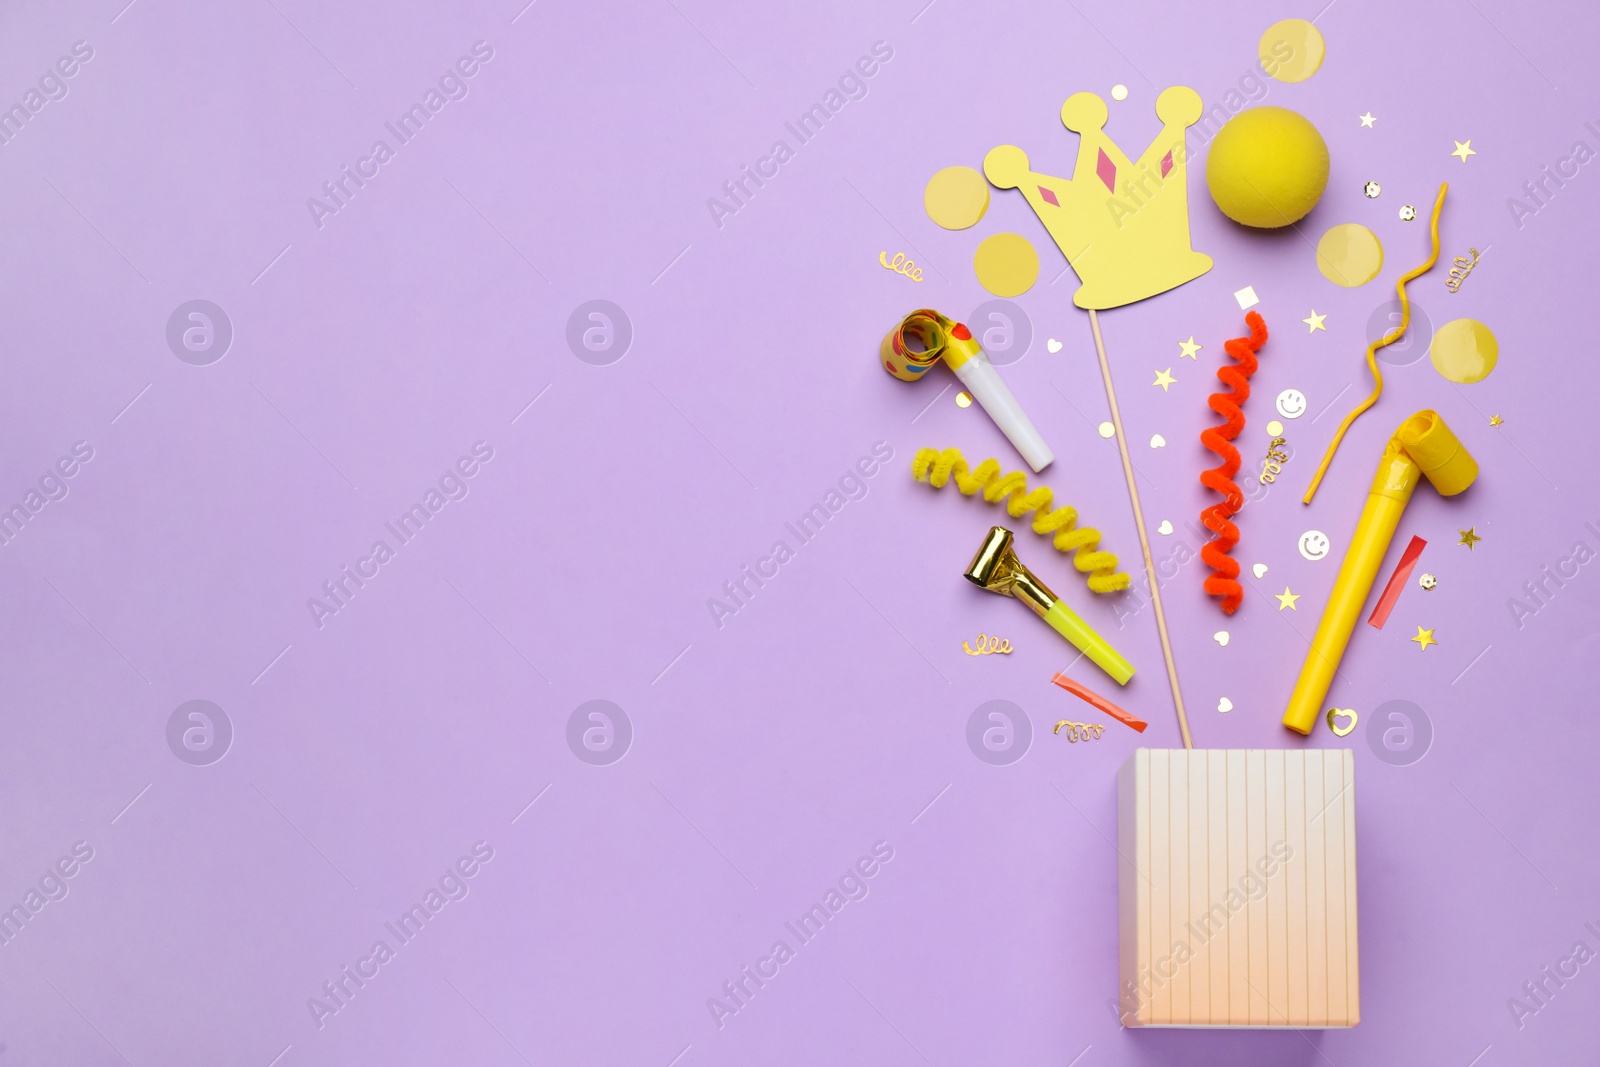 Photo of Flat lay composition with party items on pale violet background, space for text